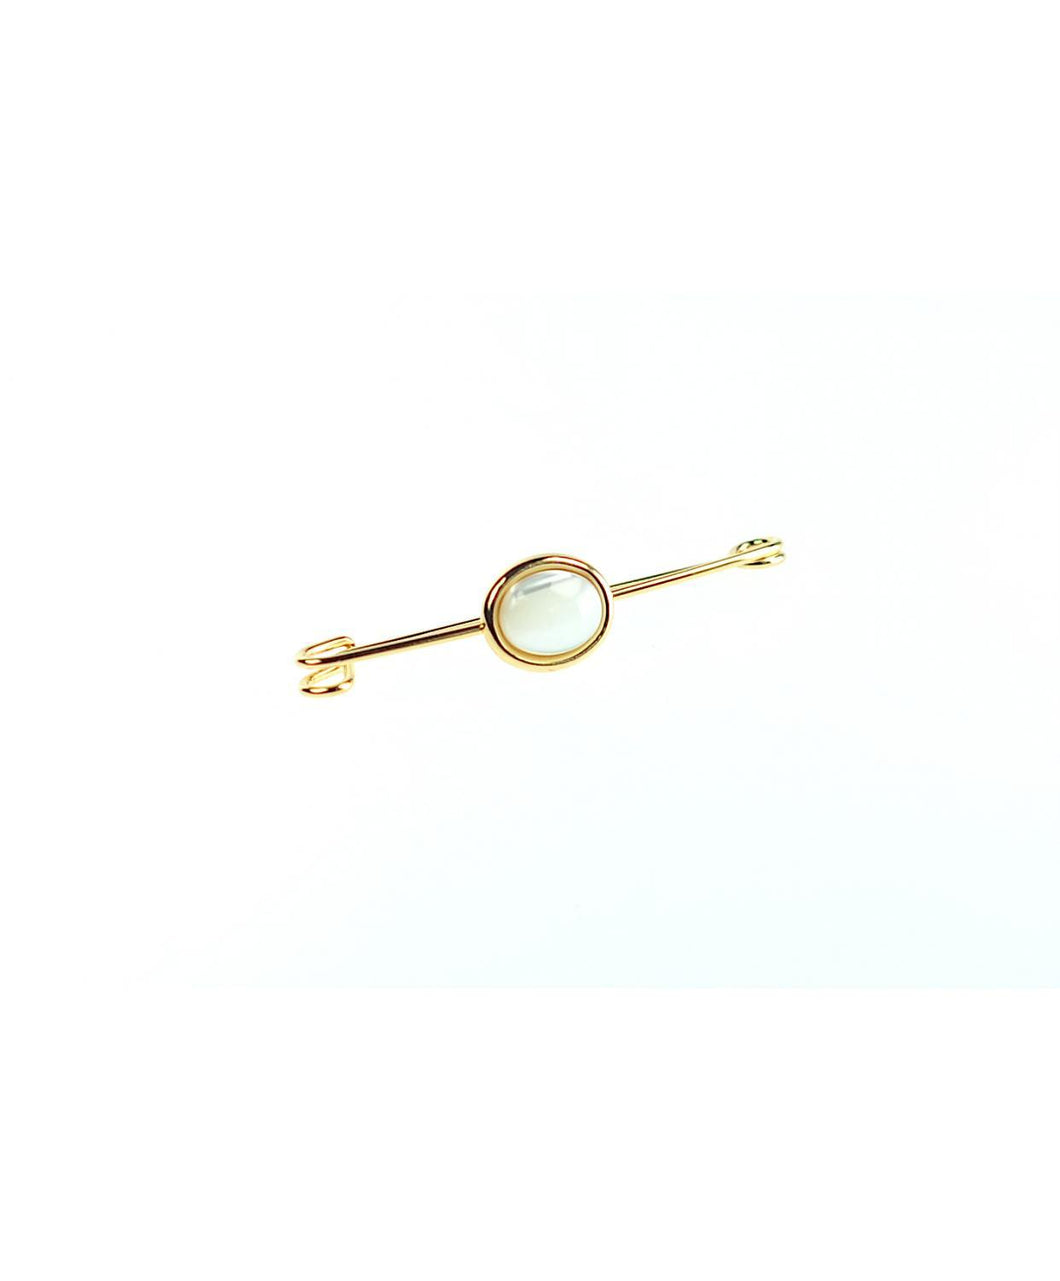 Showquest Mother of Pearl Stone Stock Pin Gold